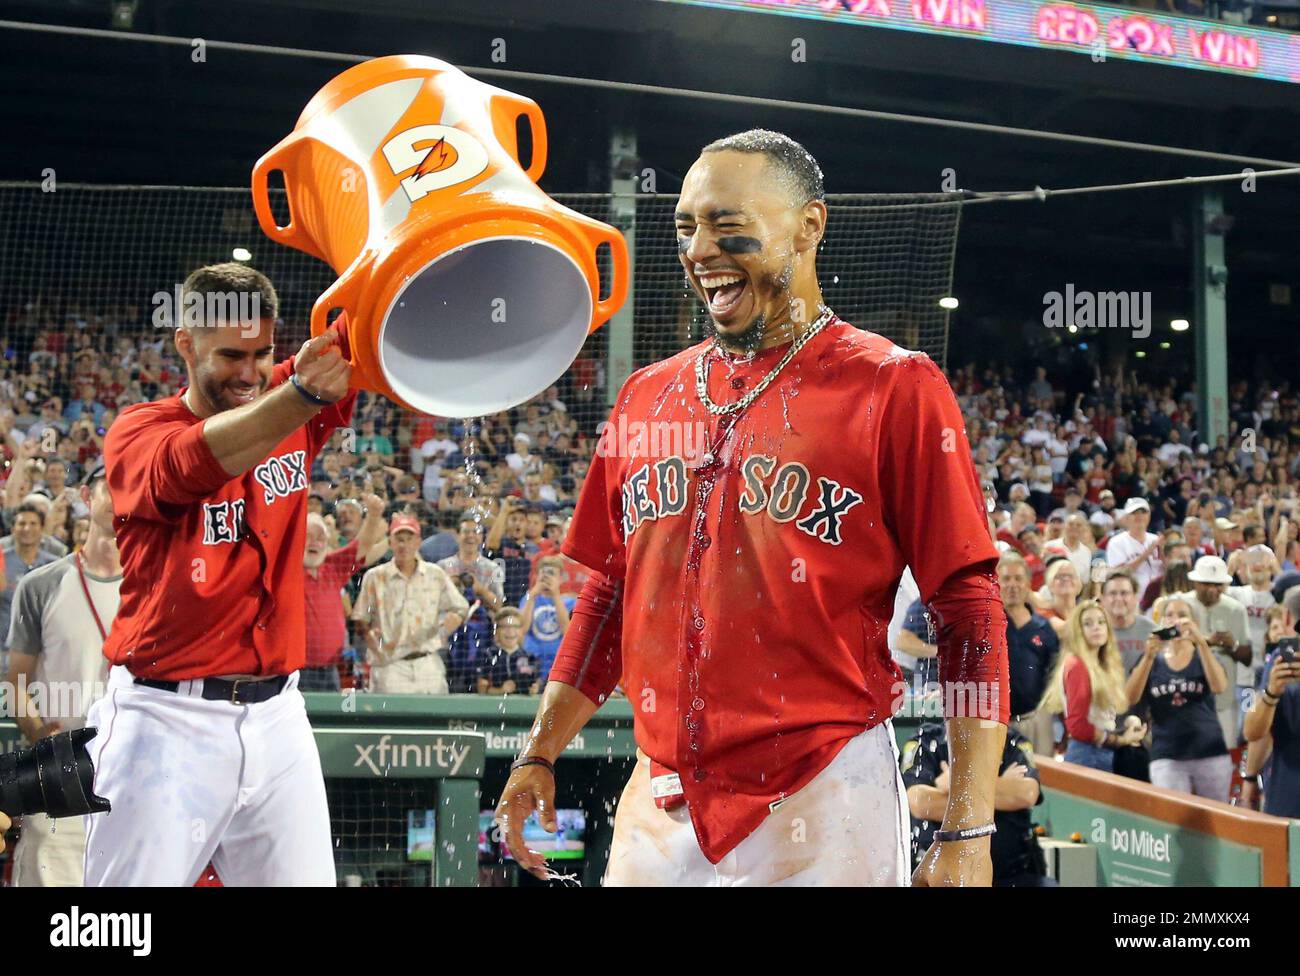 Boston Red Sox's Mookie Betts laughs after being doused with